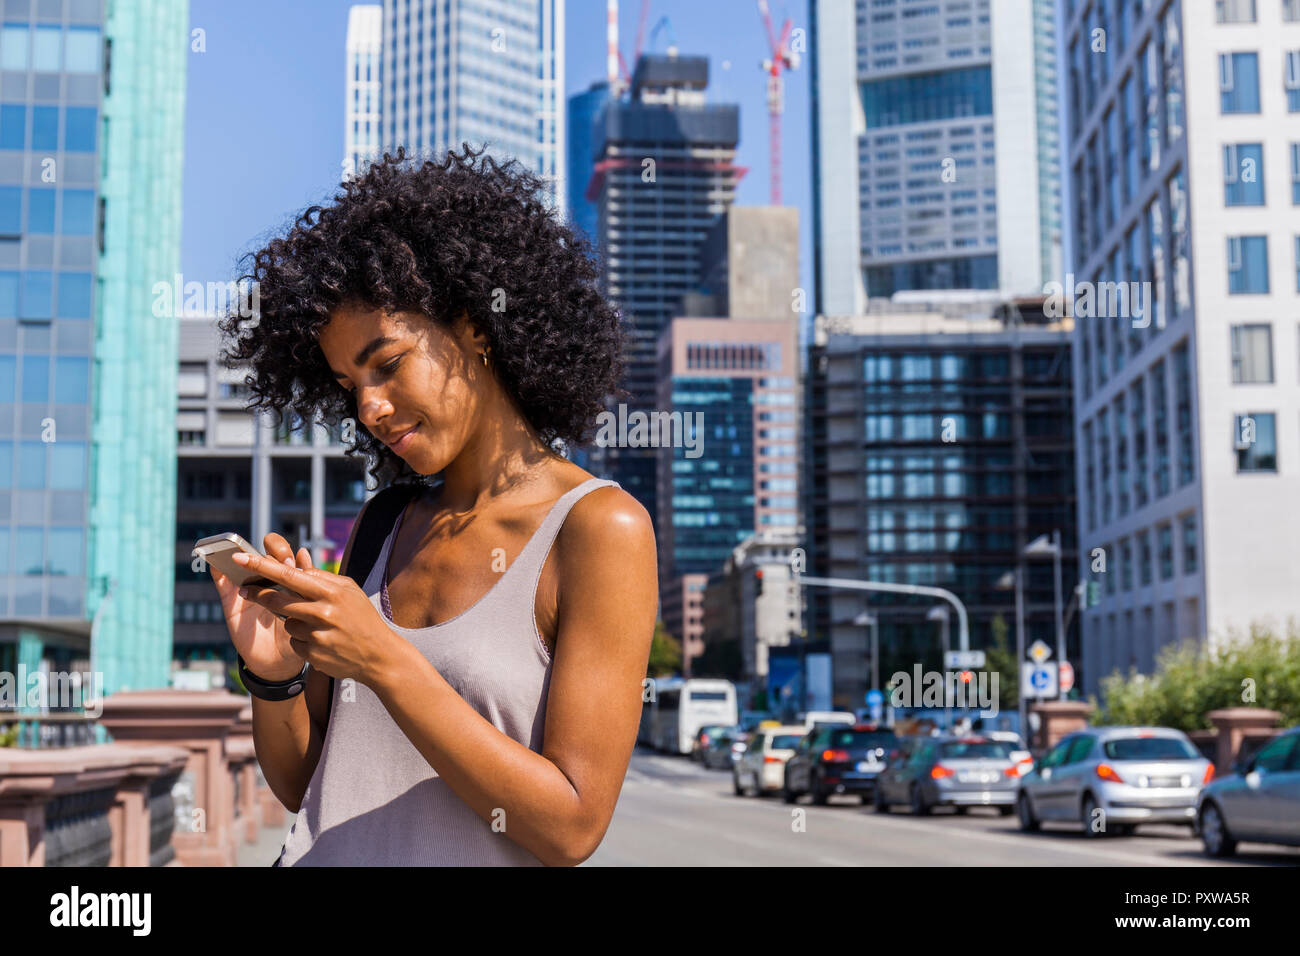 Germany, Frankfurt, young woman with curly hair using cell phone Stock Photo